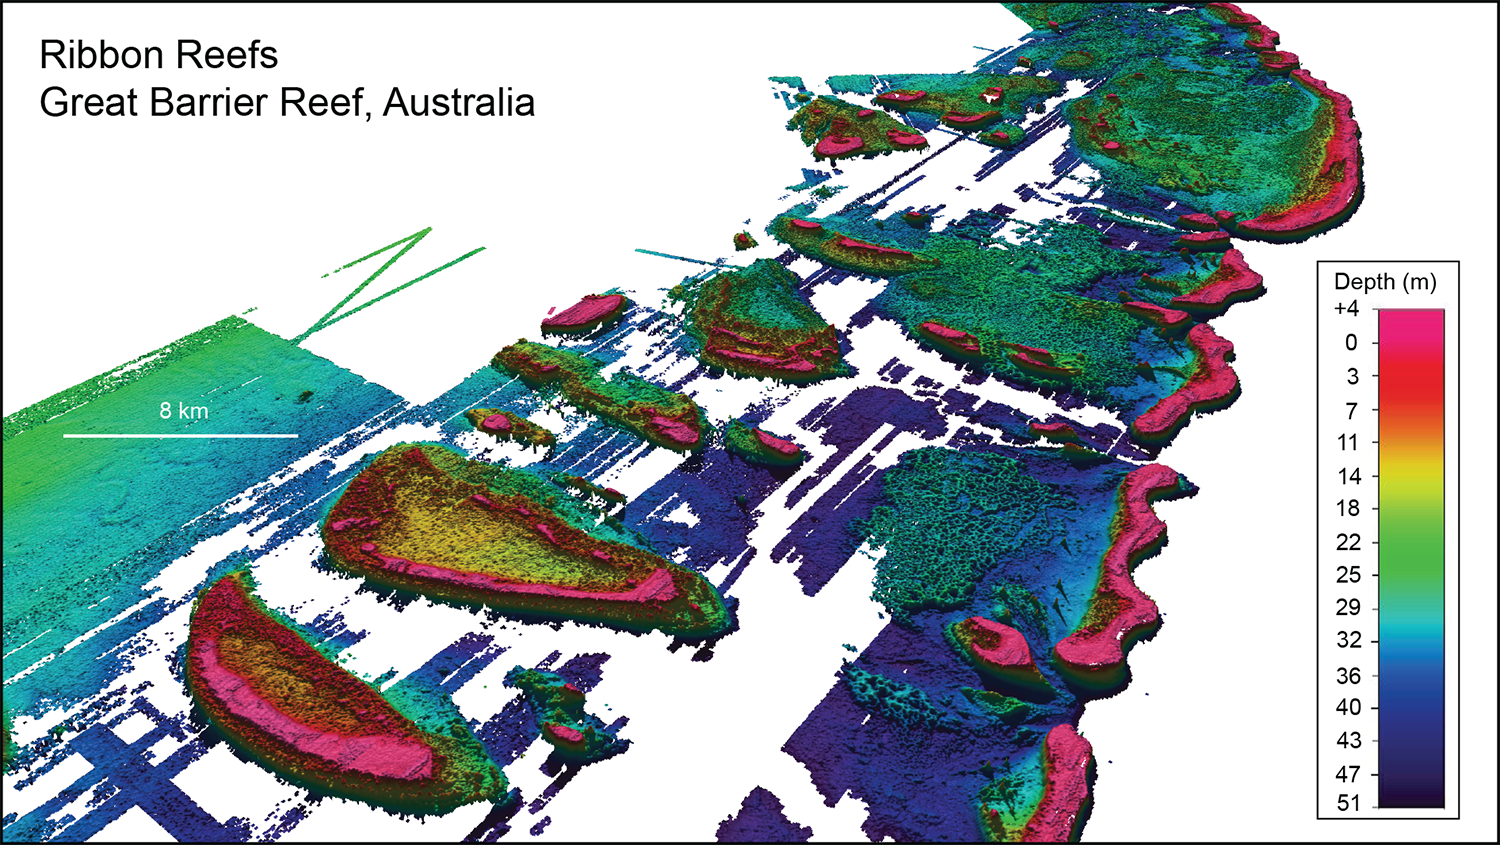 Lidar mapped Ribbon Reefs in the northern Great Barrier Reef, Australia. The gaps in data coverage are inter-reefal areas where seabed depths lie greater than about 50 m, the limits of laser penetration into the water column. Grid pixel resolution is 25 m. Total grid distance is about 110 km